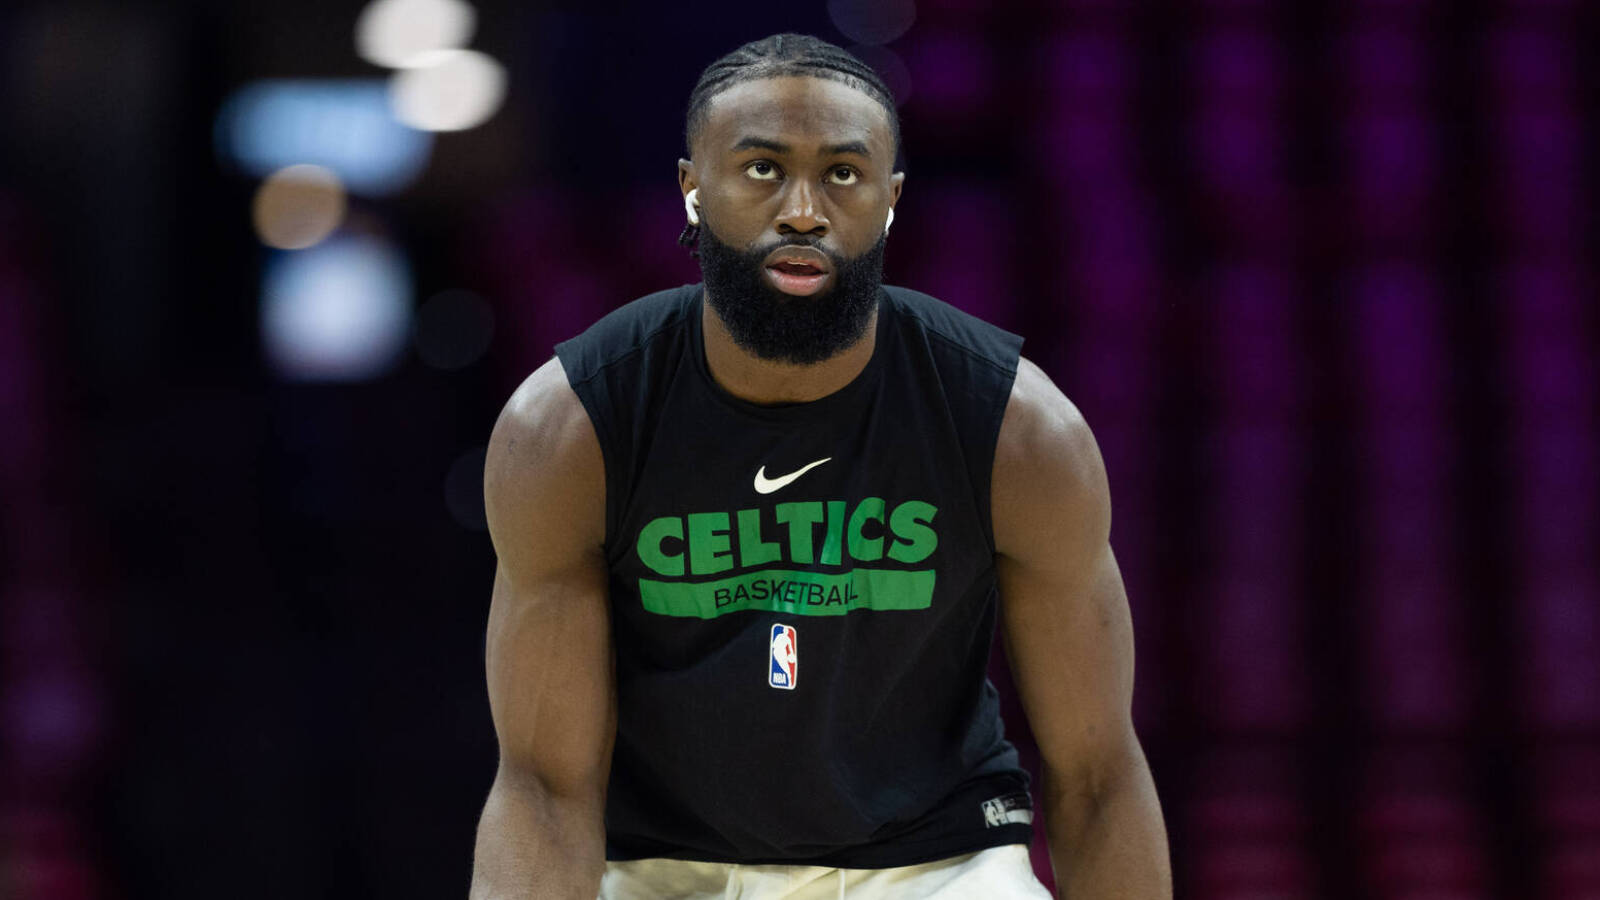 For better or worse, the Celtics and Jaylen Brown are joined at the hip